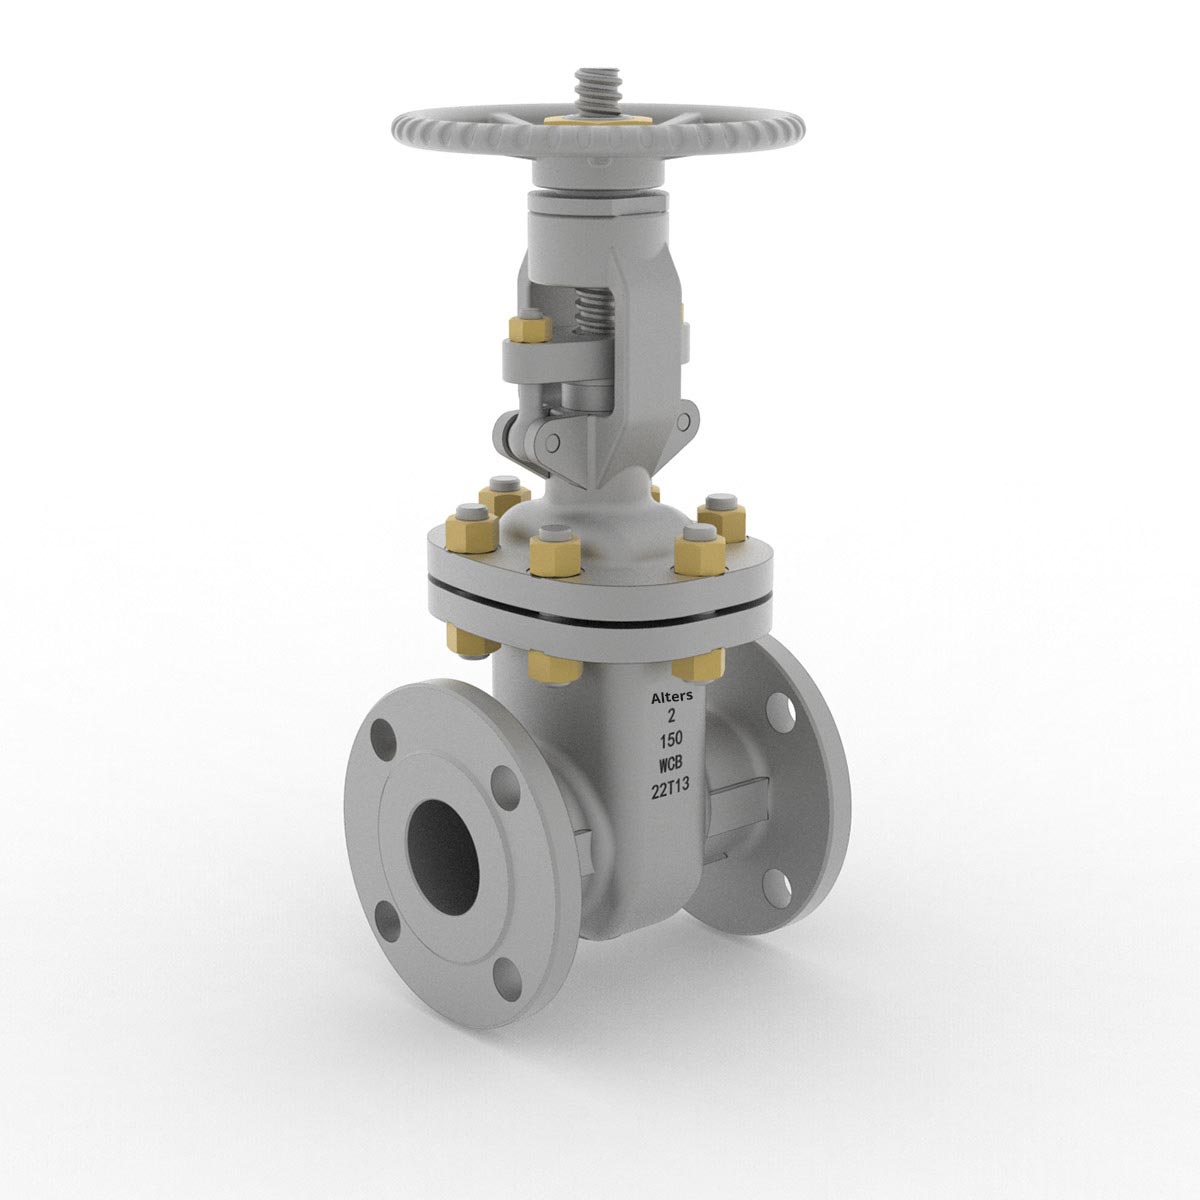 Image of a gate valve from AlterValve with company name and specifications.